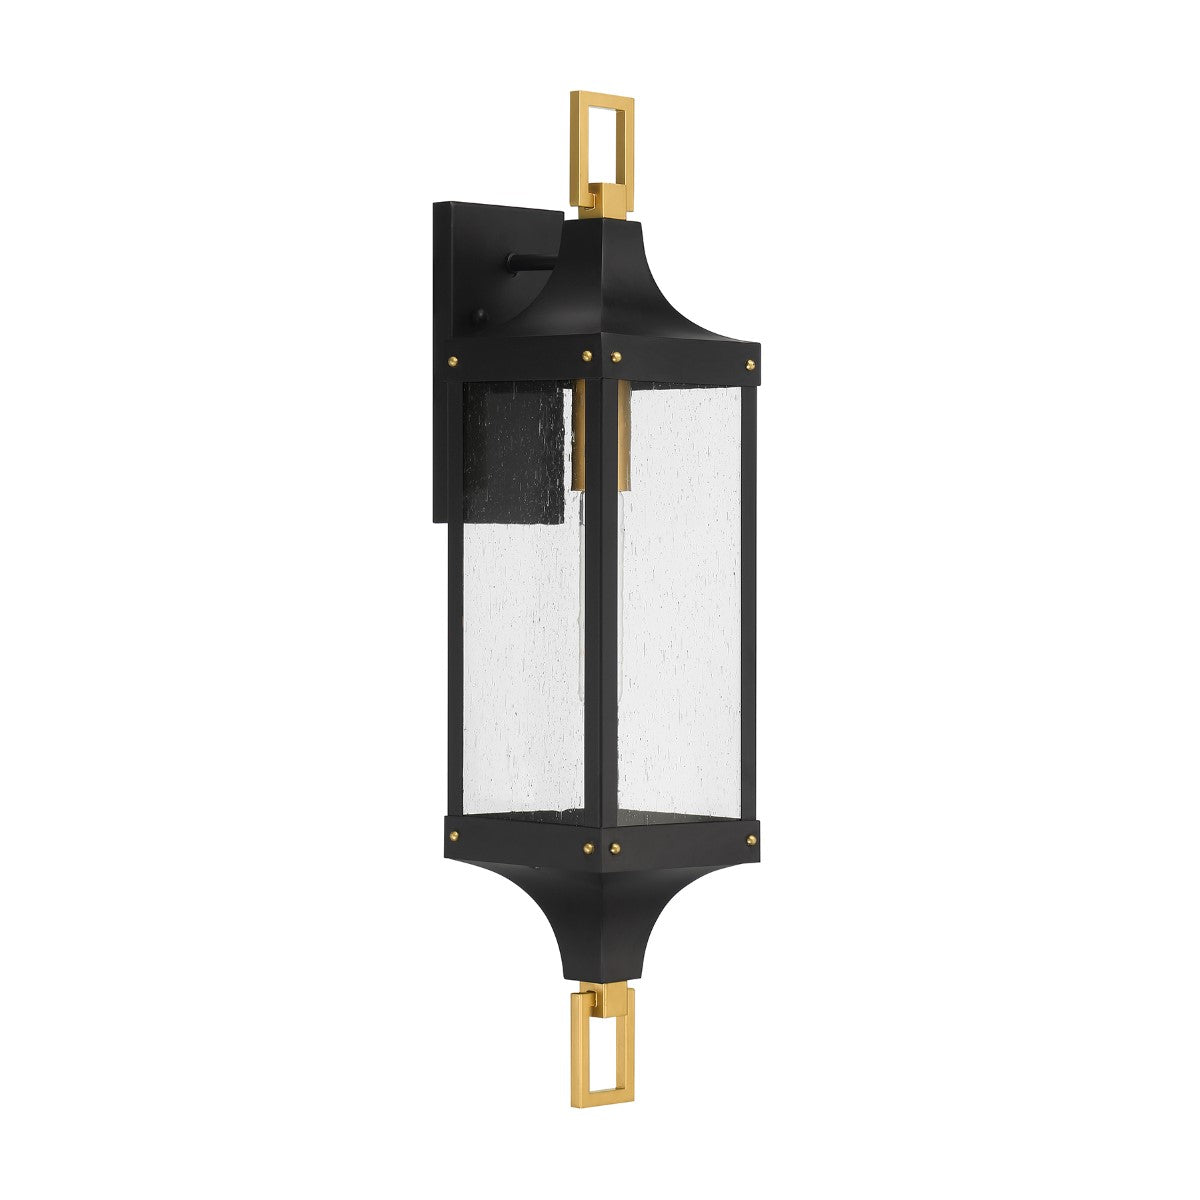 Glendale 28 in. Outdoor Wall Lantern Matte Black and Weathered Brushed Brass Finish